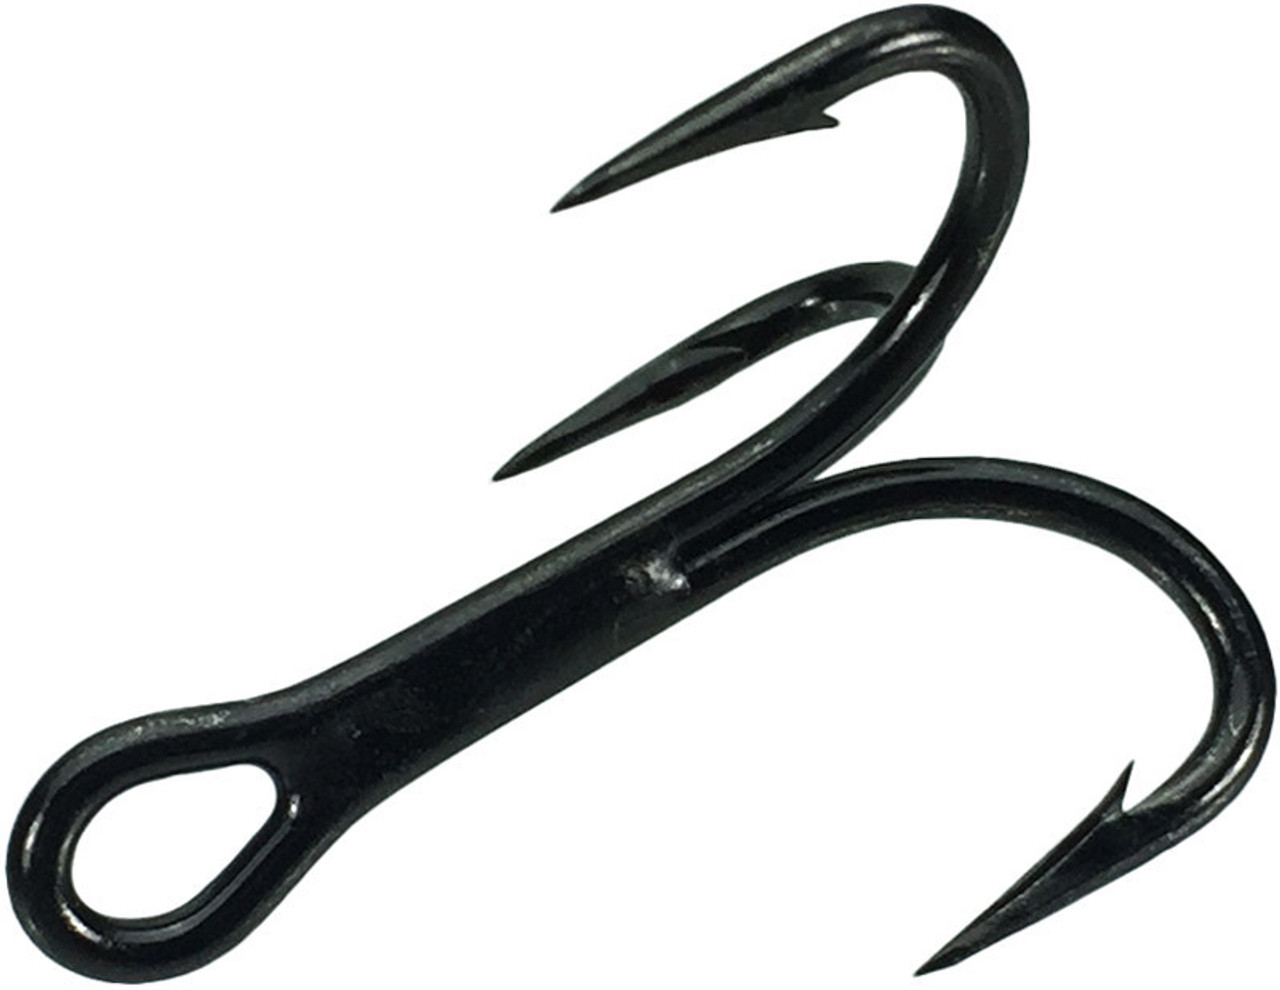 VMC 9626 BN Treble Hooks 4X Strong, Sizes 8 - 2/0 - Barlow's Tackle